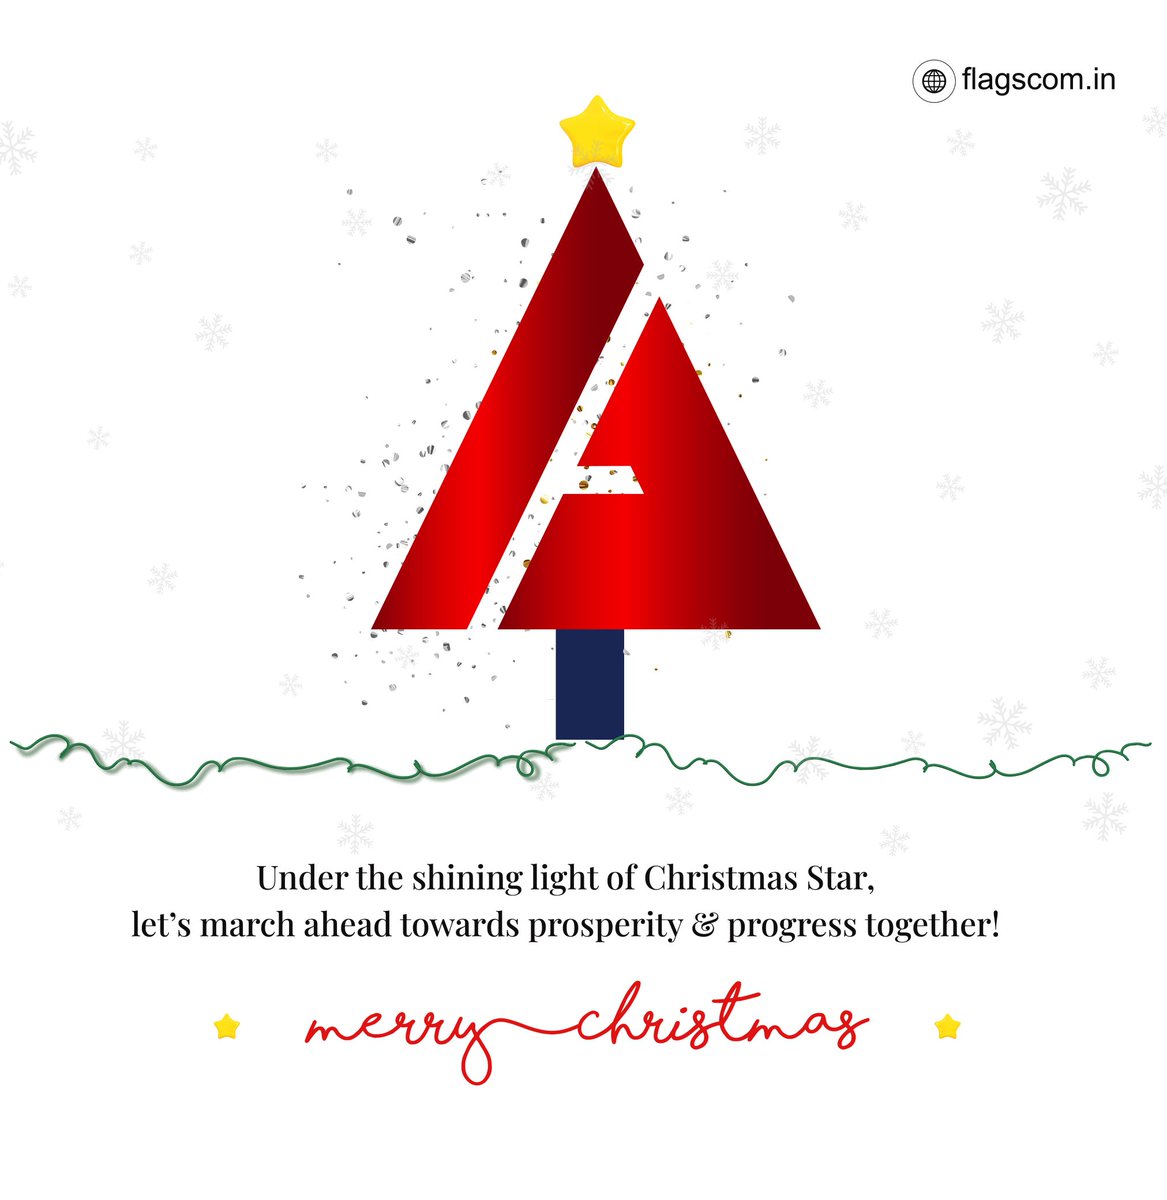 Wishing everyone a Merry Christmas filled with joy, love, and festive cheer! #MerryChristmas #christmas #FlagsCommunications 🎄🎅